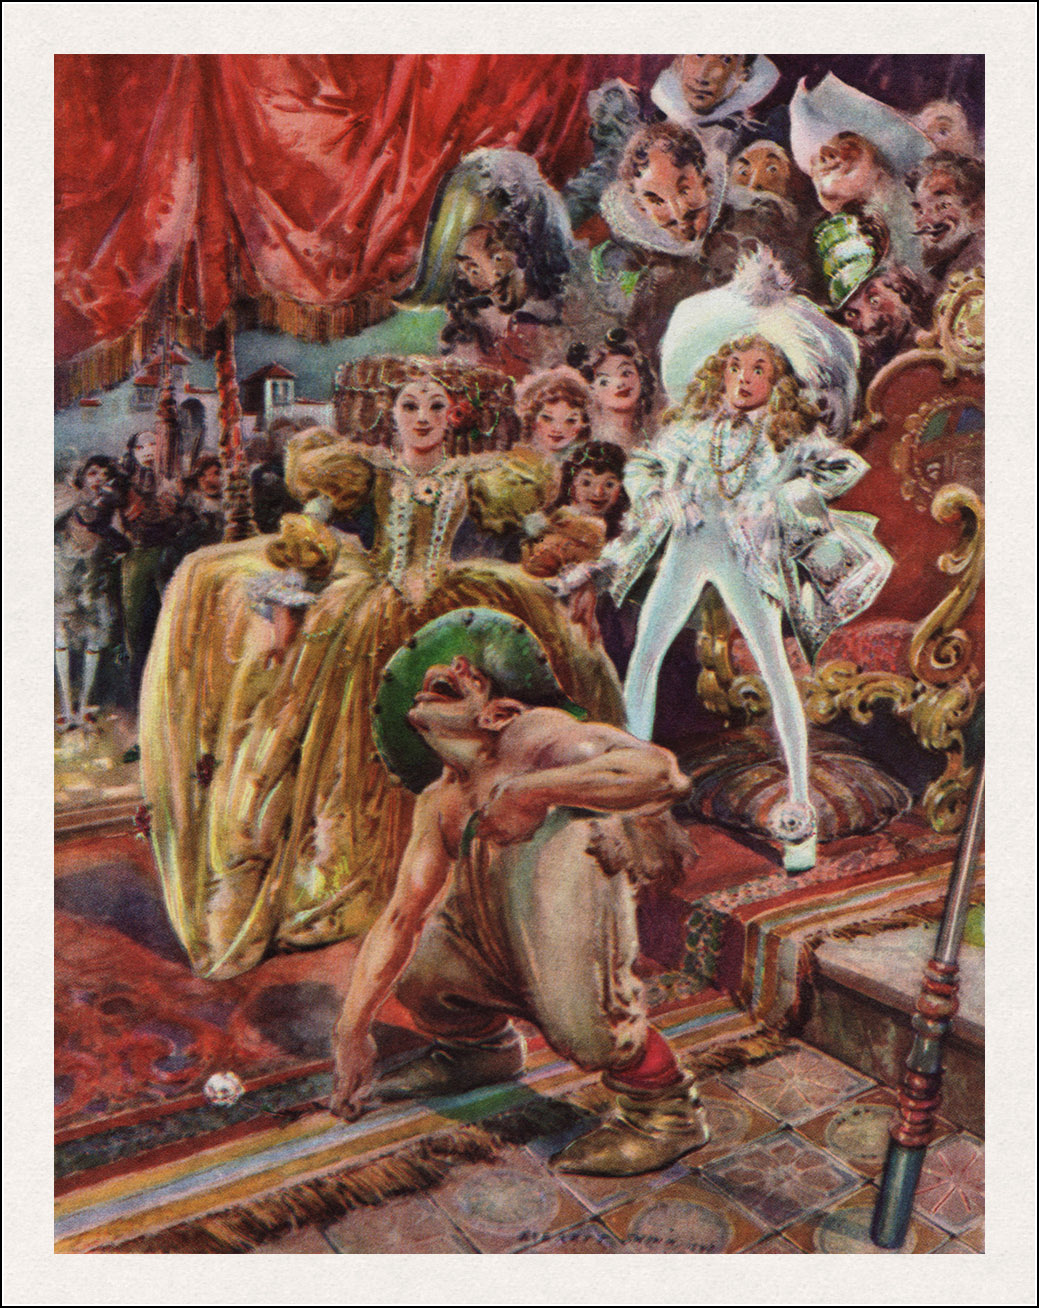 Everett Shinn, The happy prince and other tales by Oscar Wilde